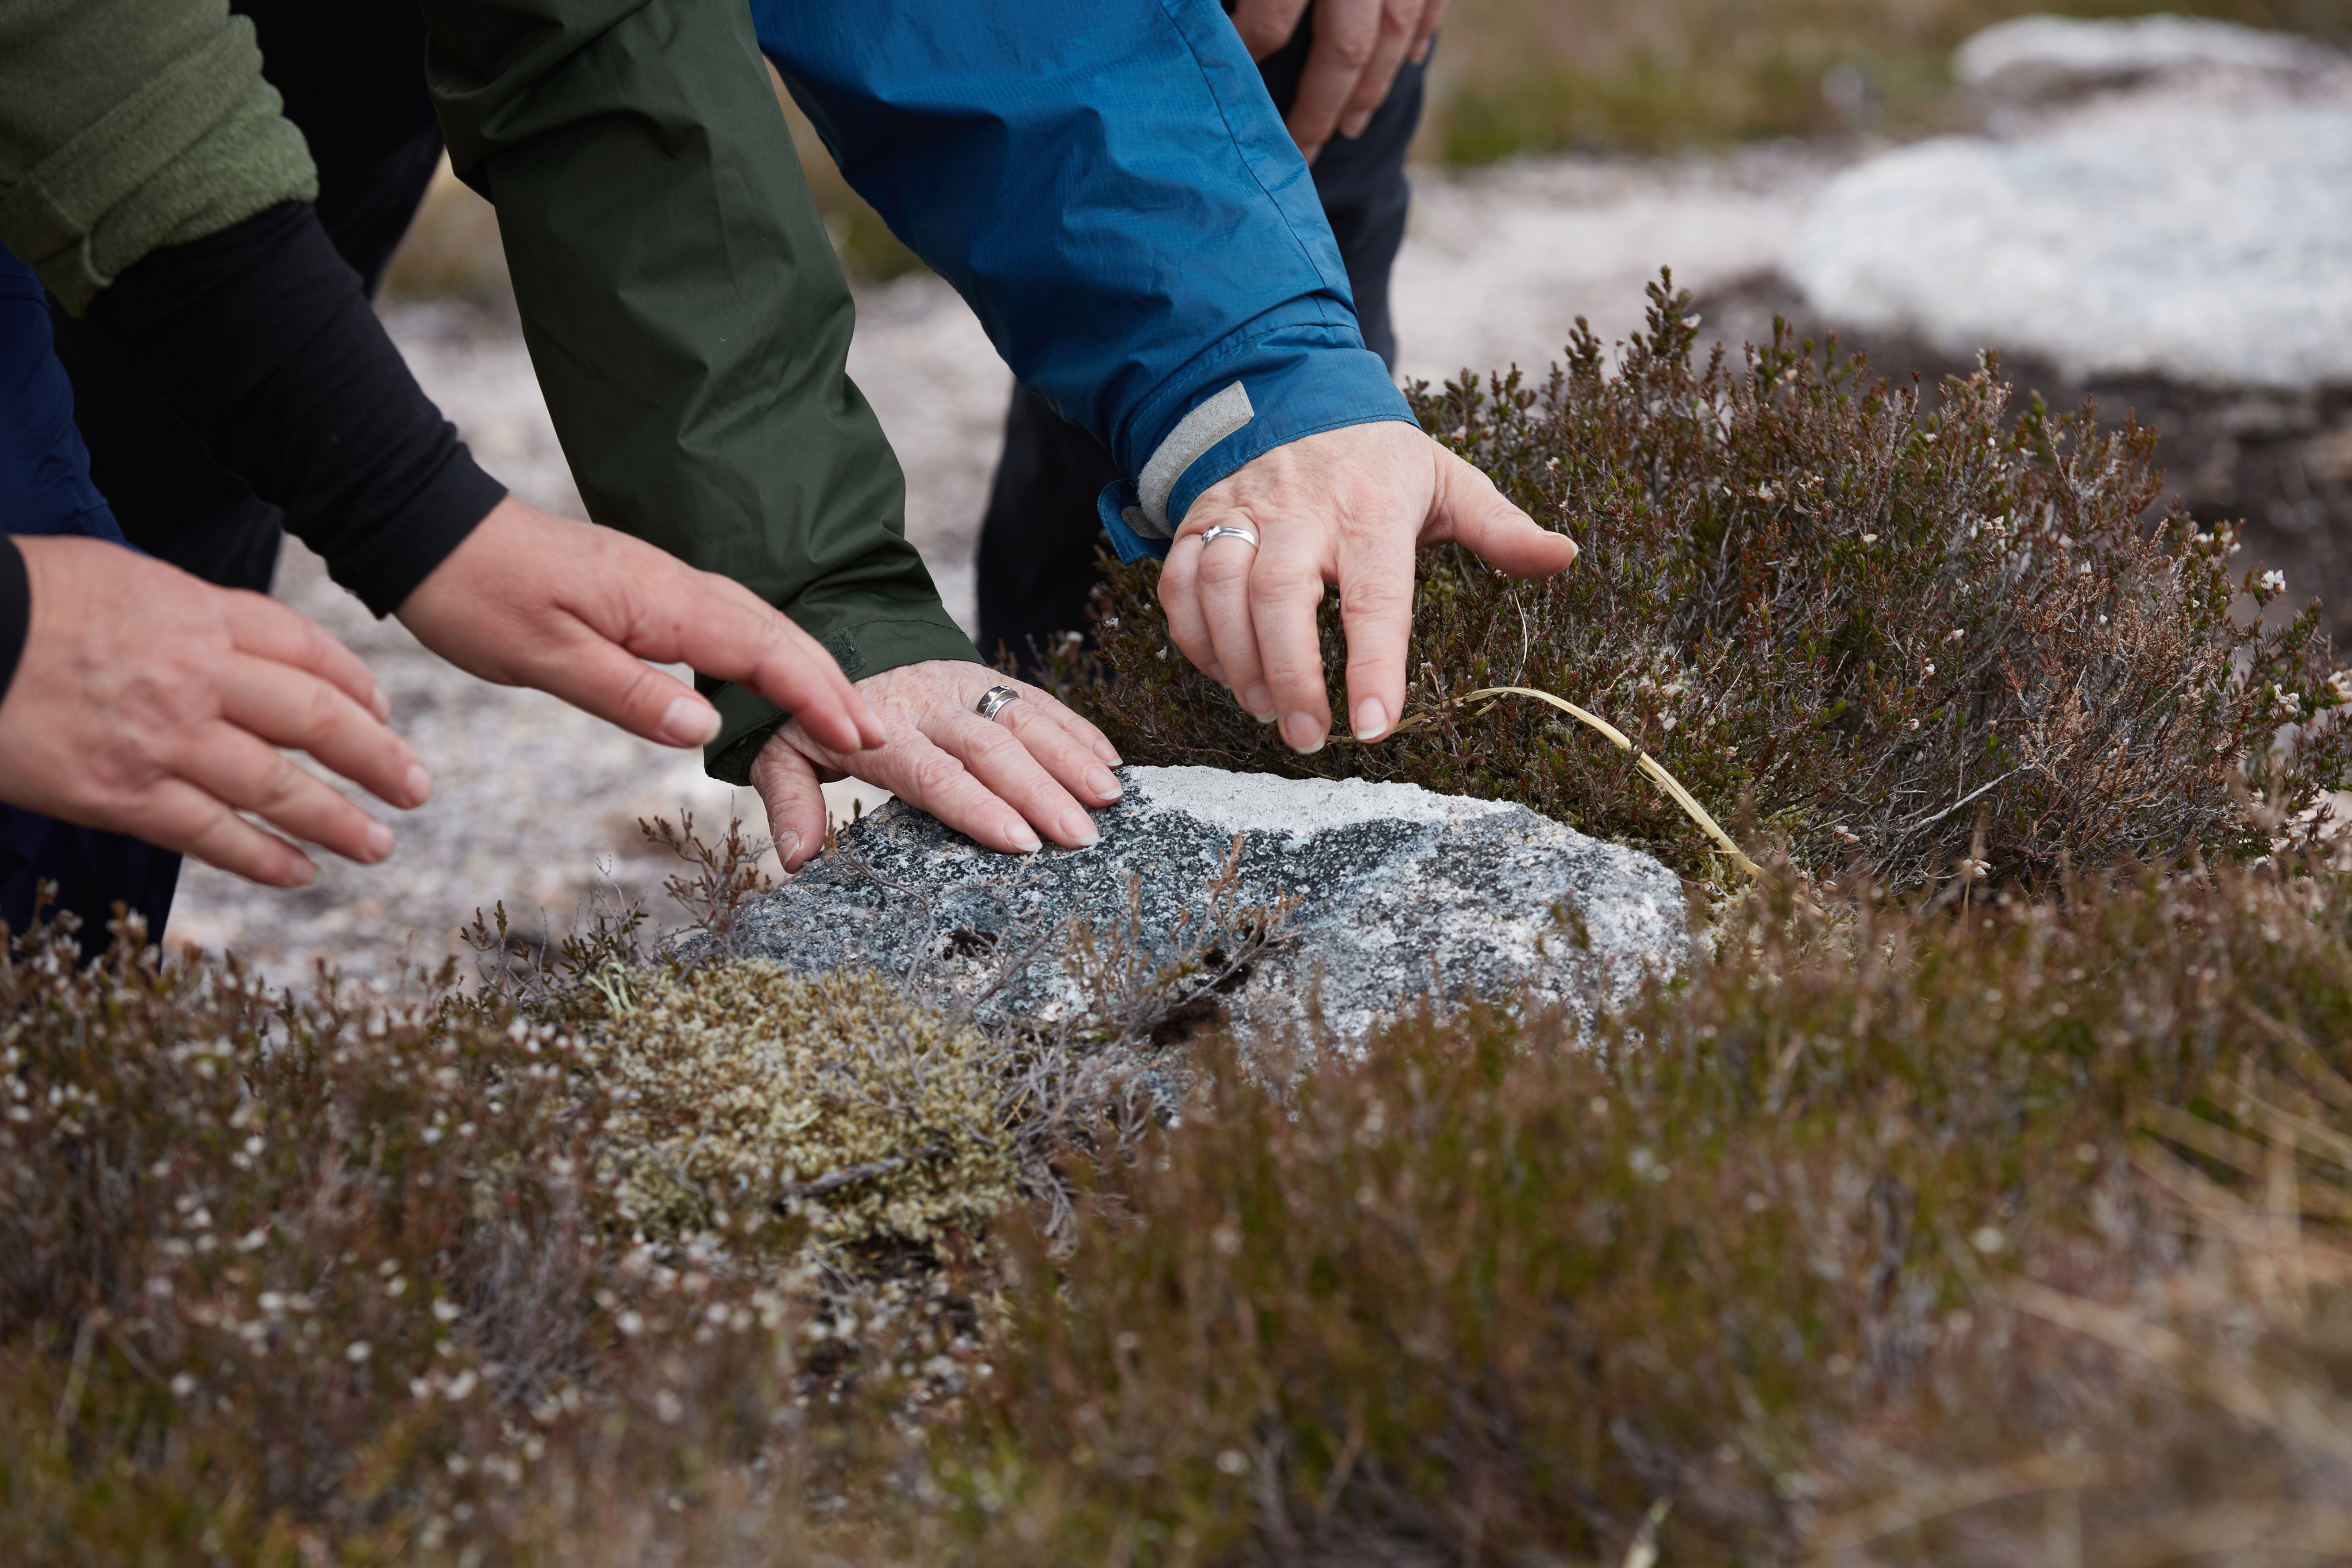 3 people's hands touch a lichen covered rock